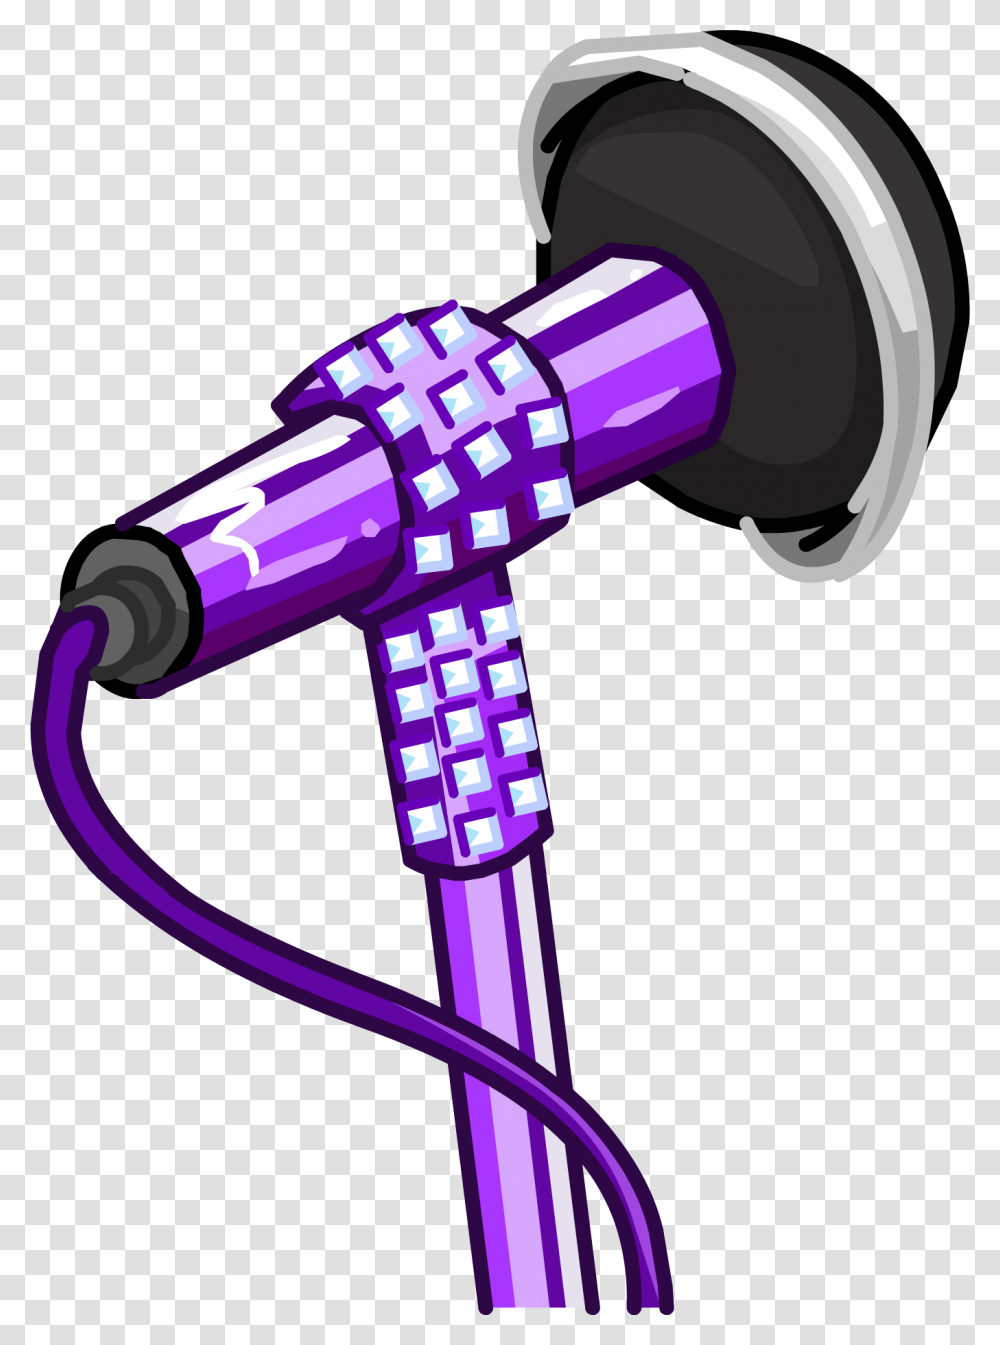 Microphone Glitter Club Penguin Microphone, Dryer, Appliance, Blow Dryer Transparent Png